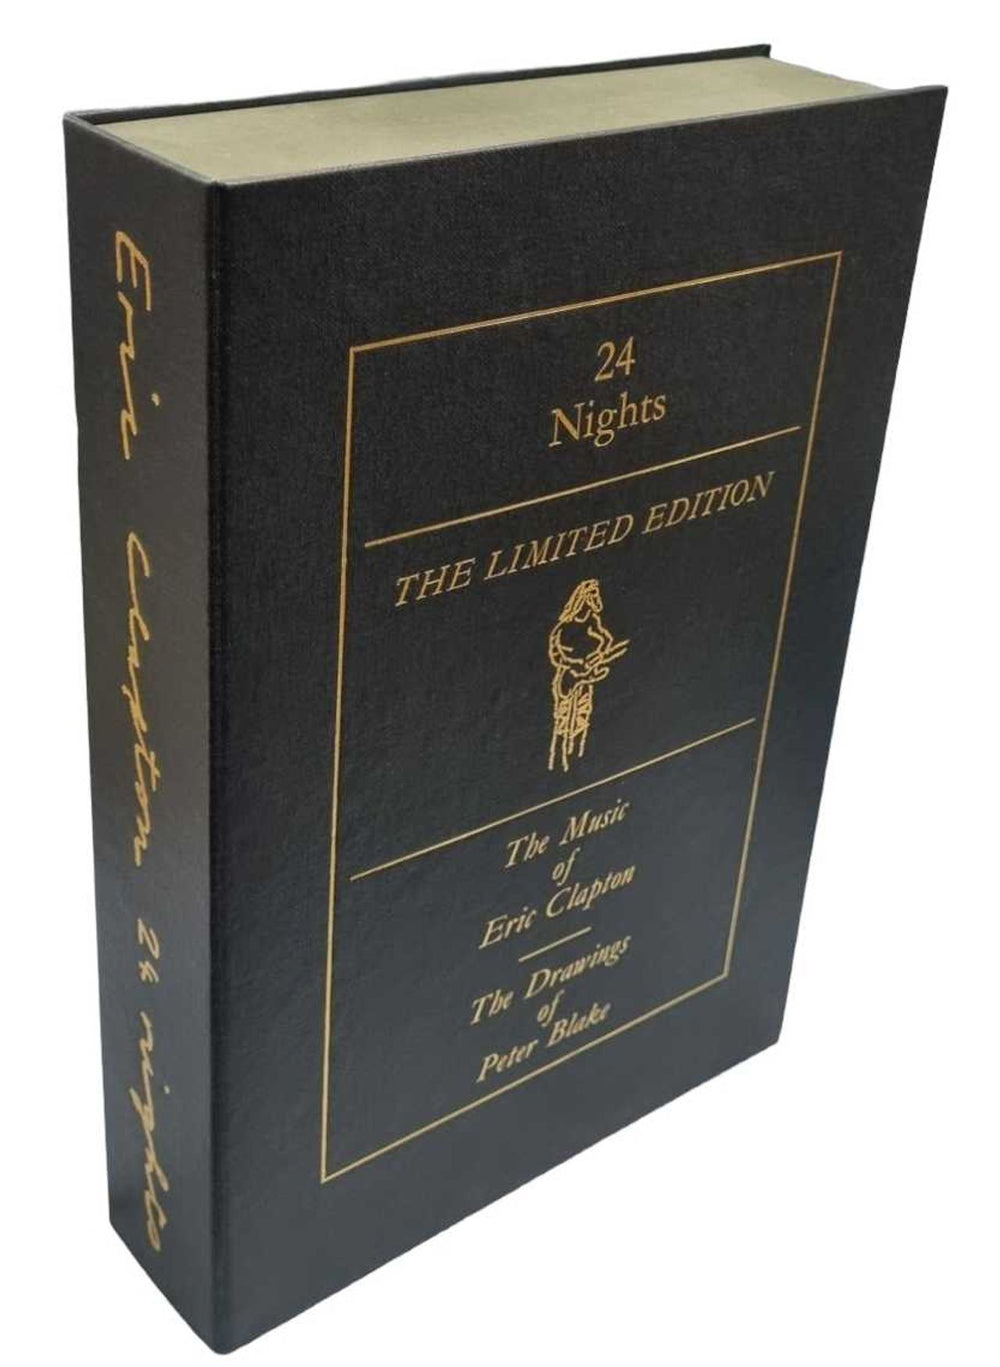 Eric Clapton 24 Nights The Limited Edition - Numbered UK book NUMBERED EDITION